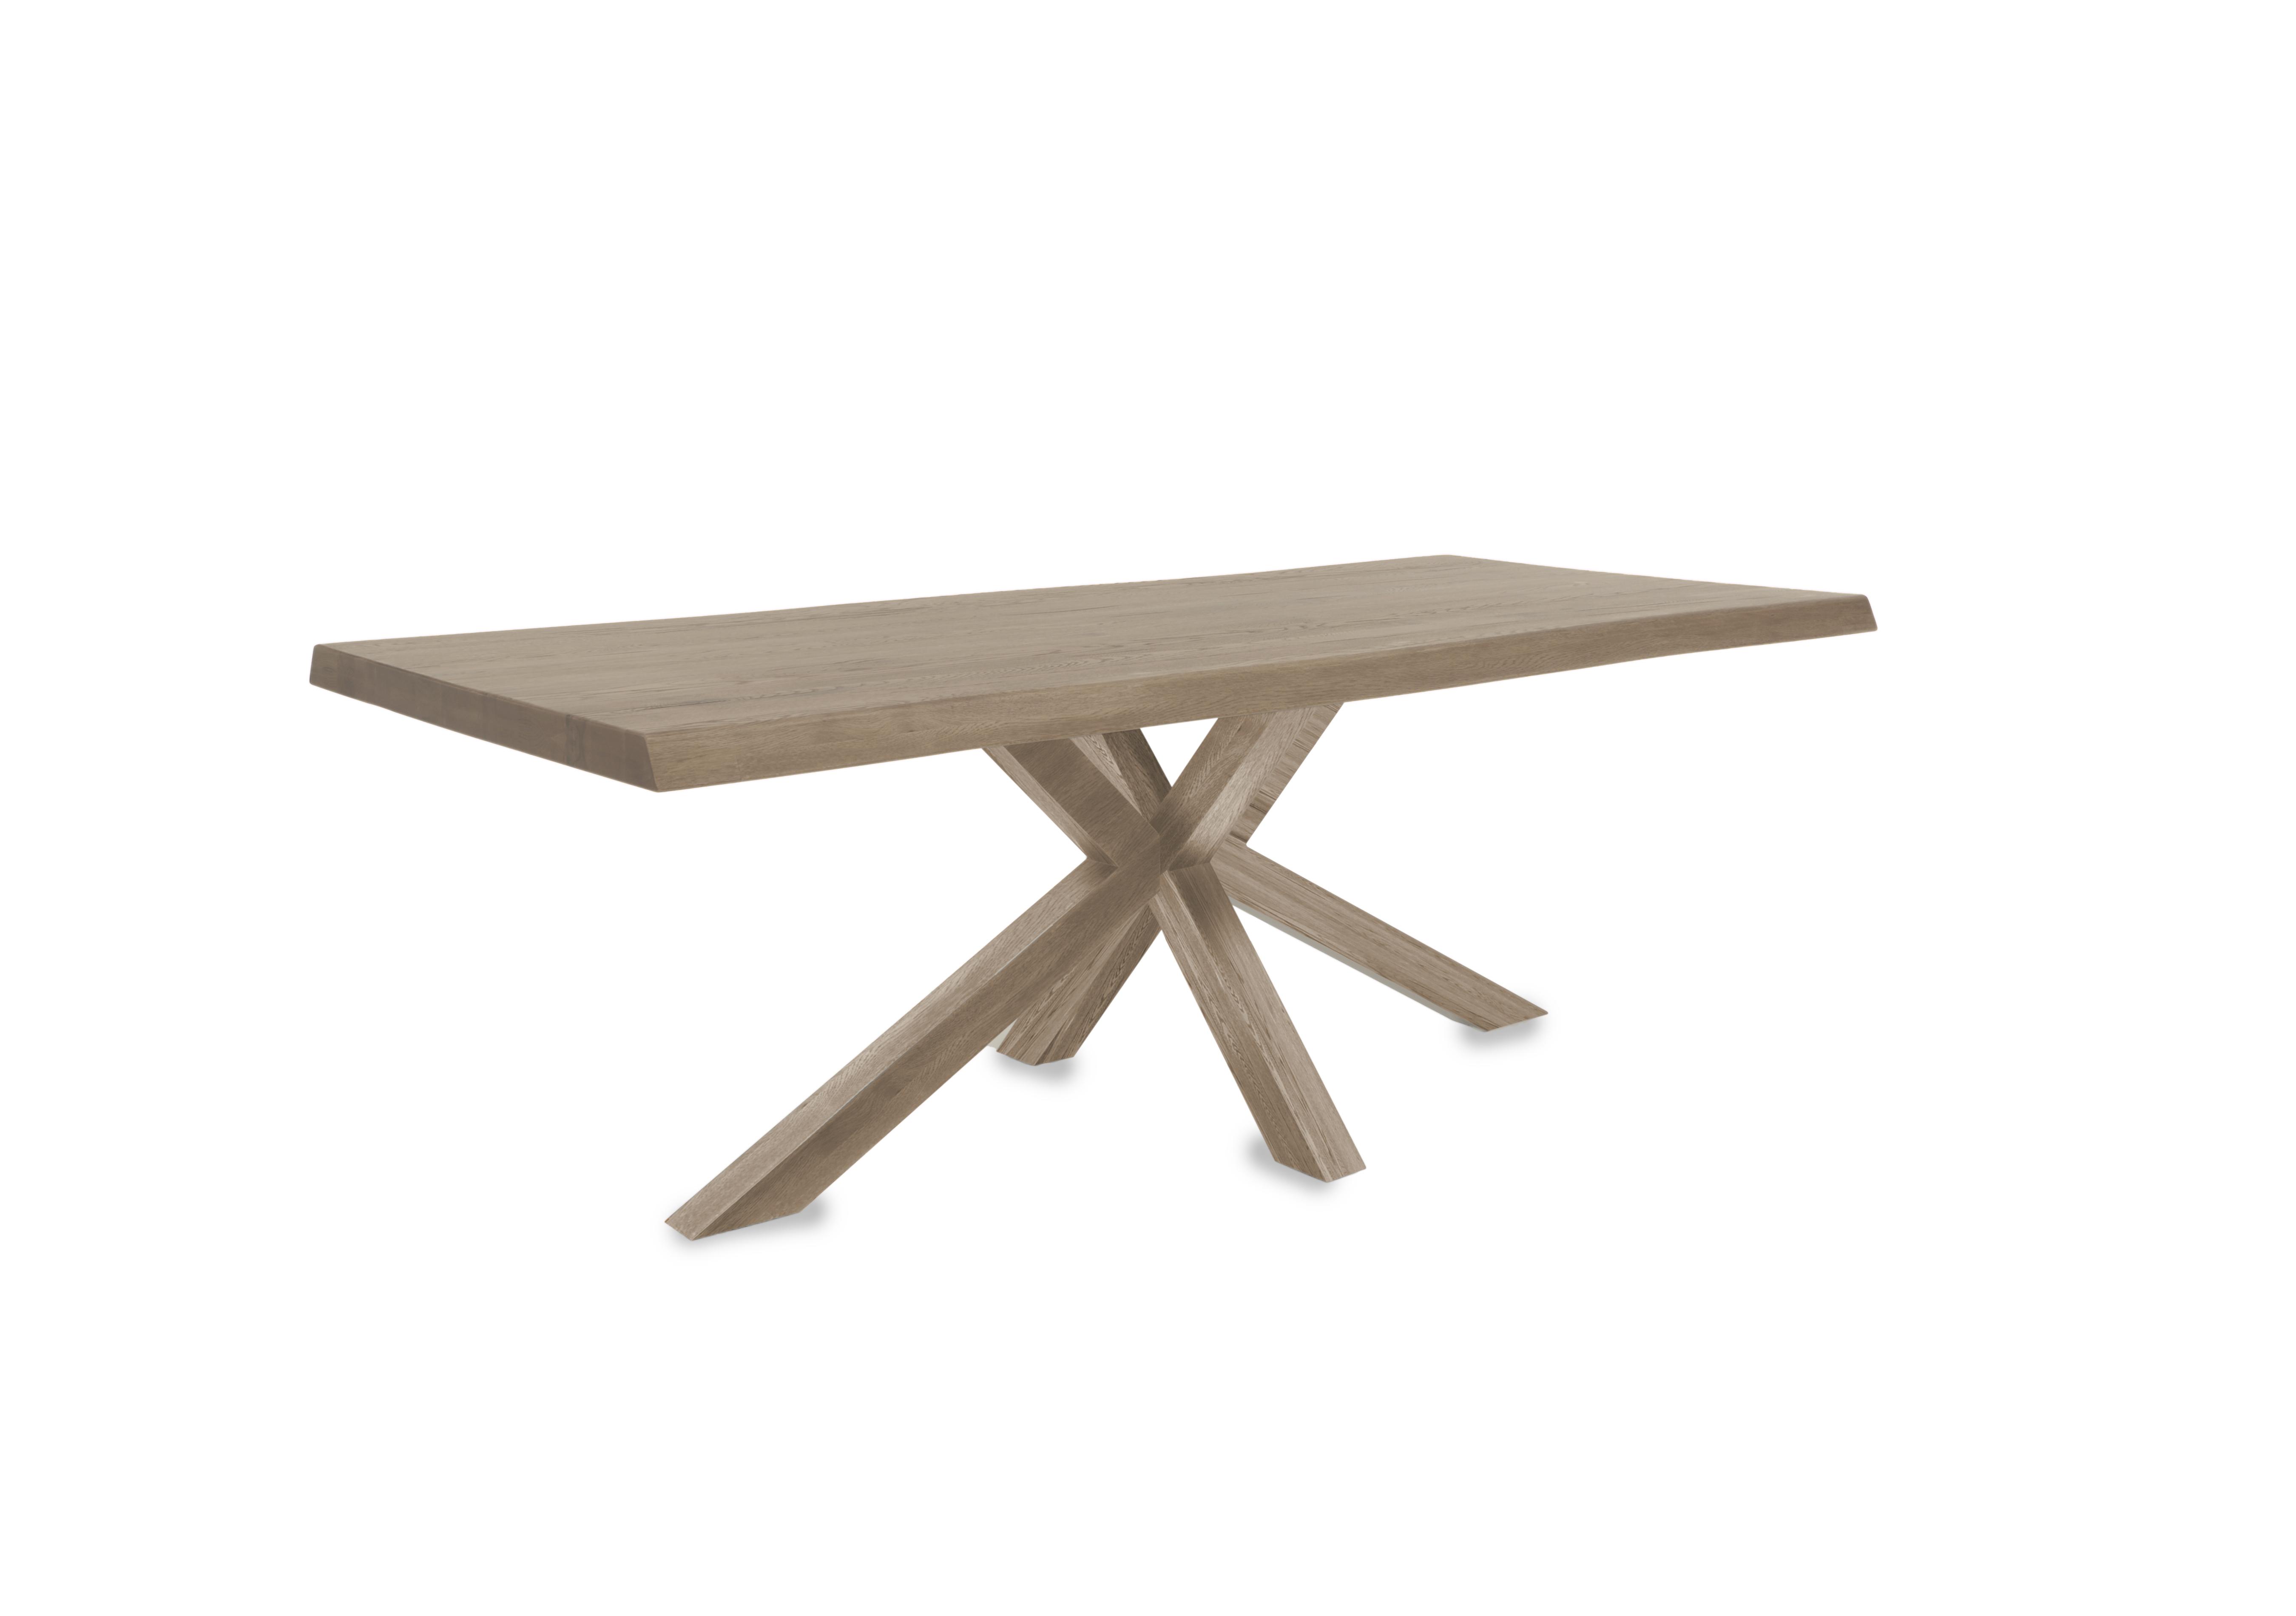 Njord Raw Edge Dining Table with Wood Star Base in Vintage Grey on Furniture Village